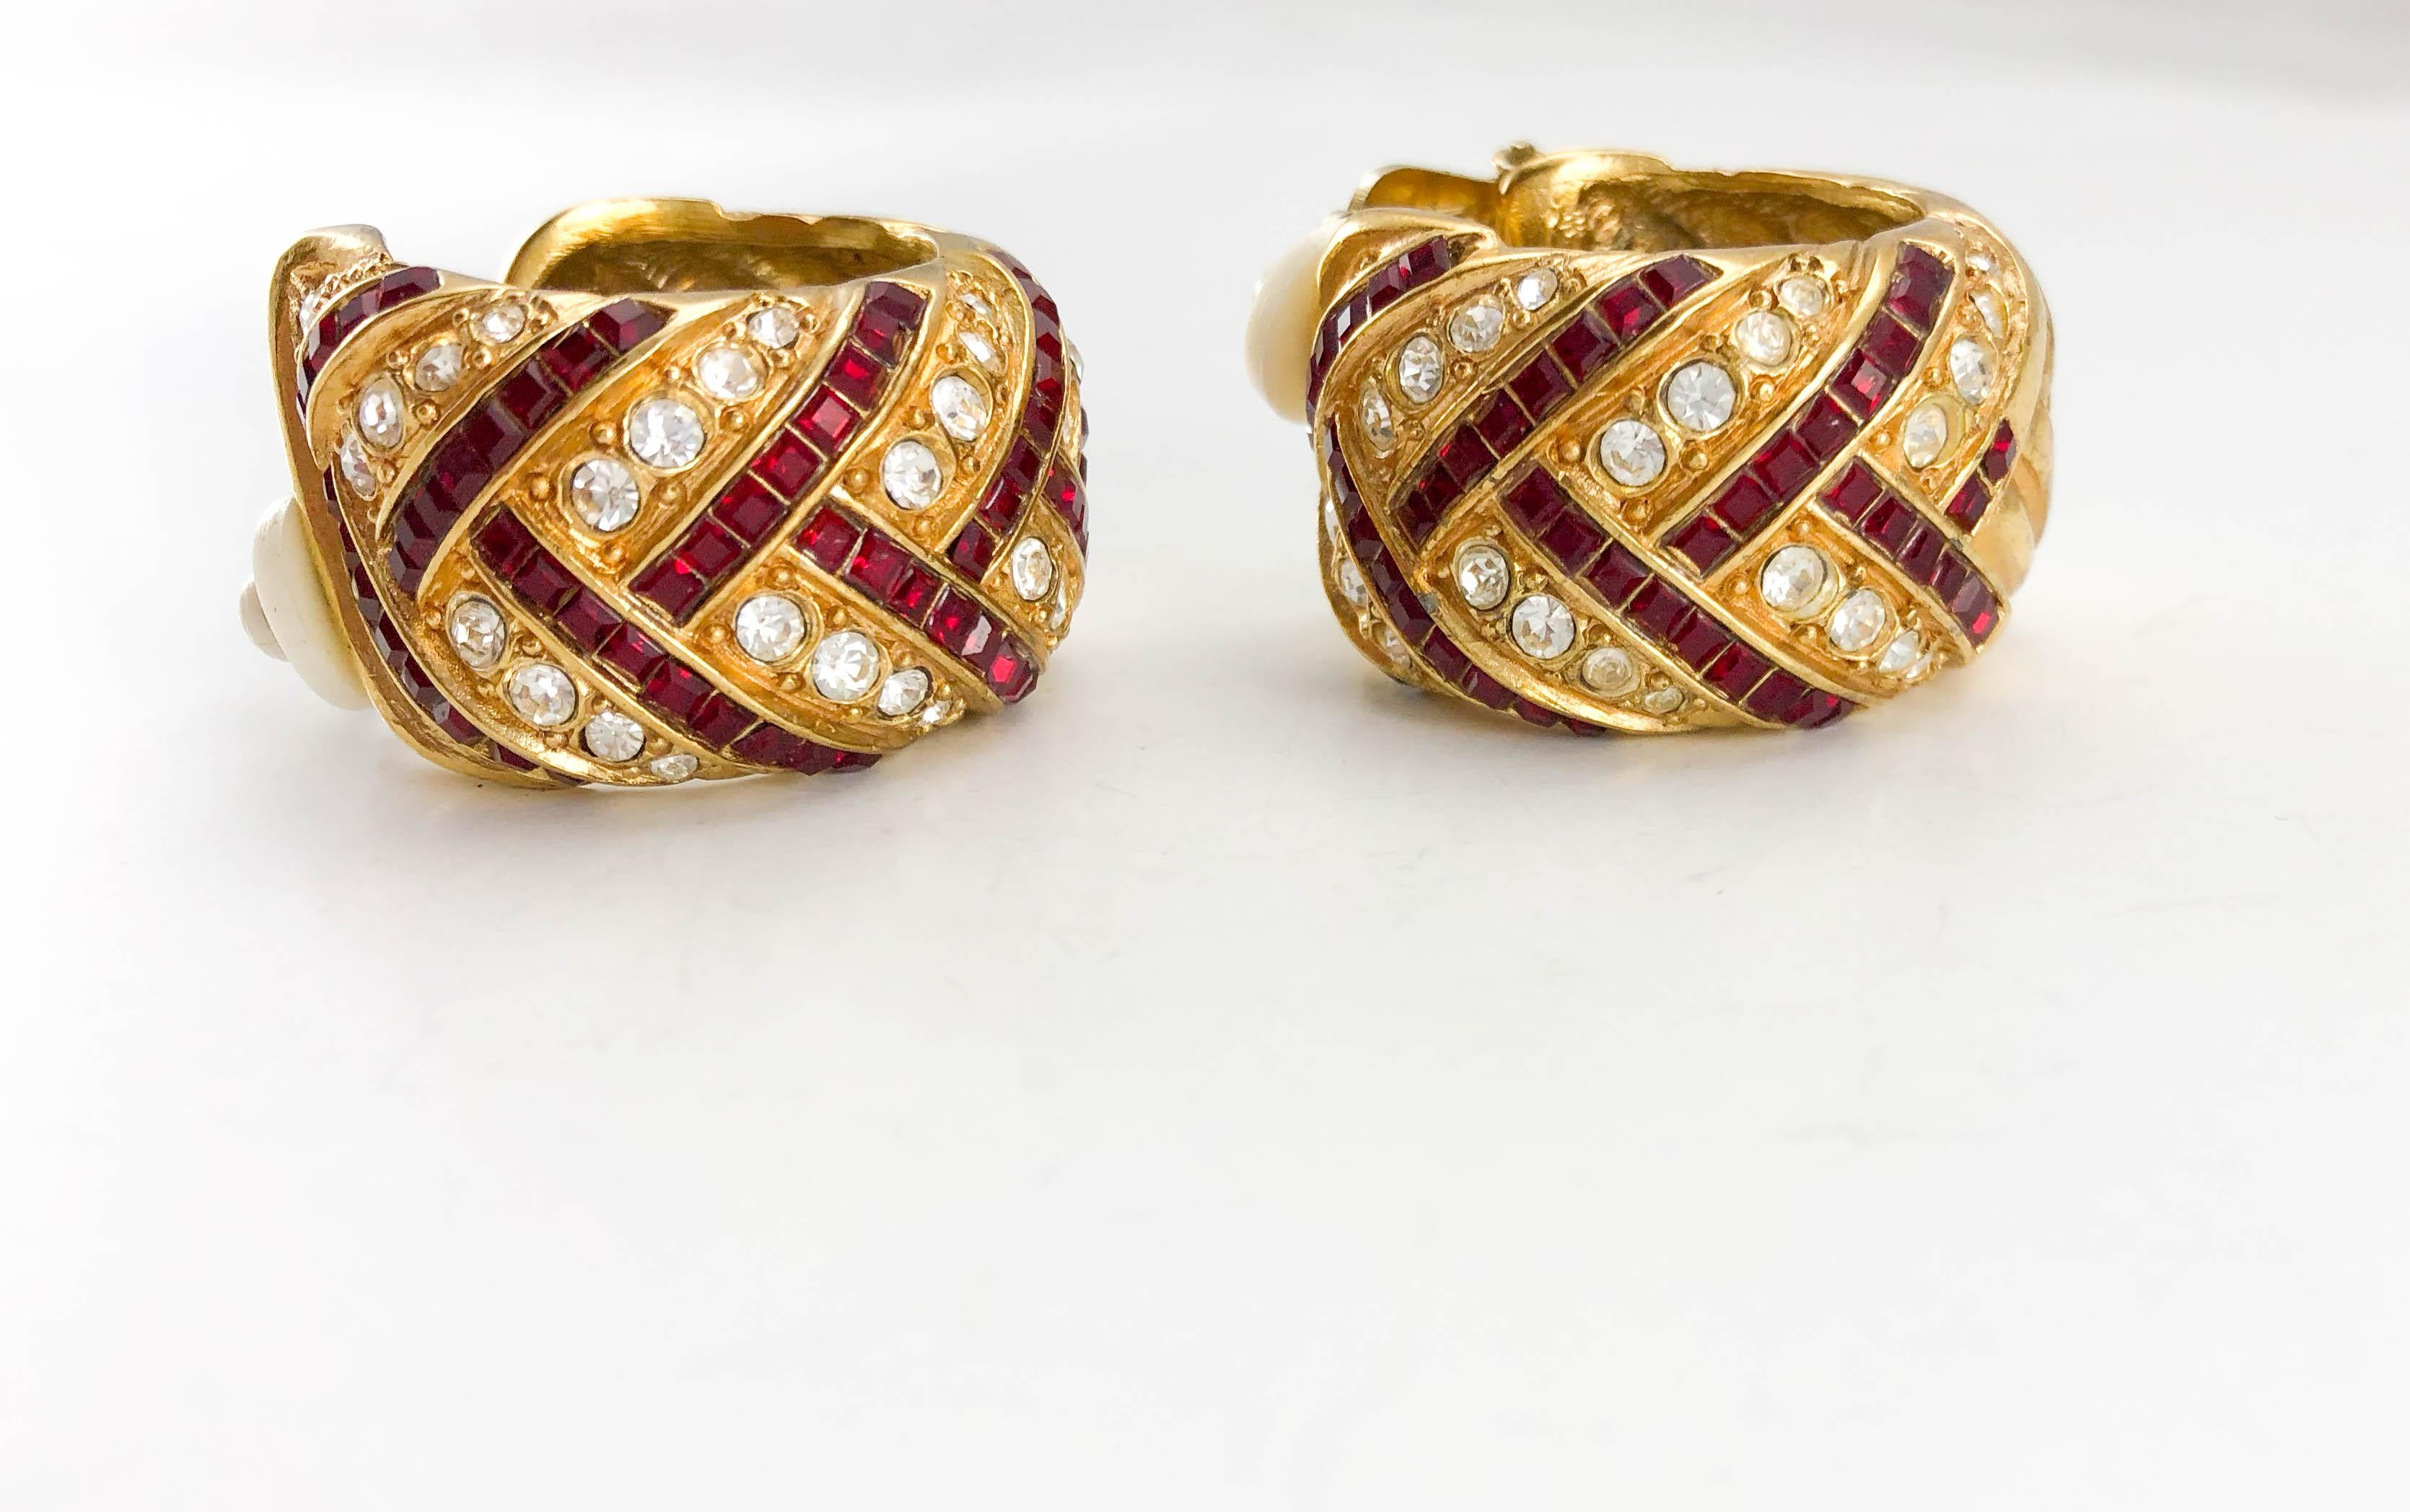 1980's Yves Saint Laurent Crystal Embellished Gold-Plated Hoop Earrings In Excellent Condition In London, Chelsea